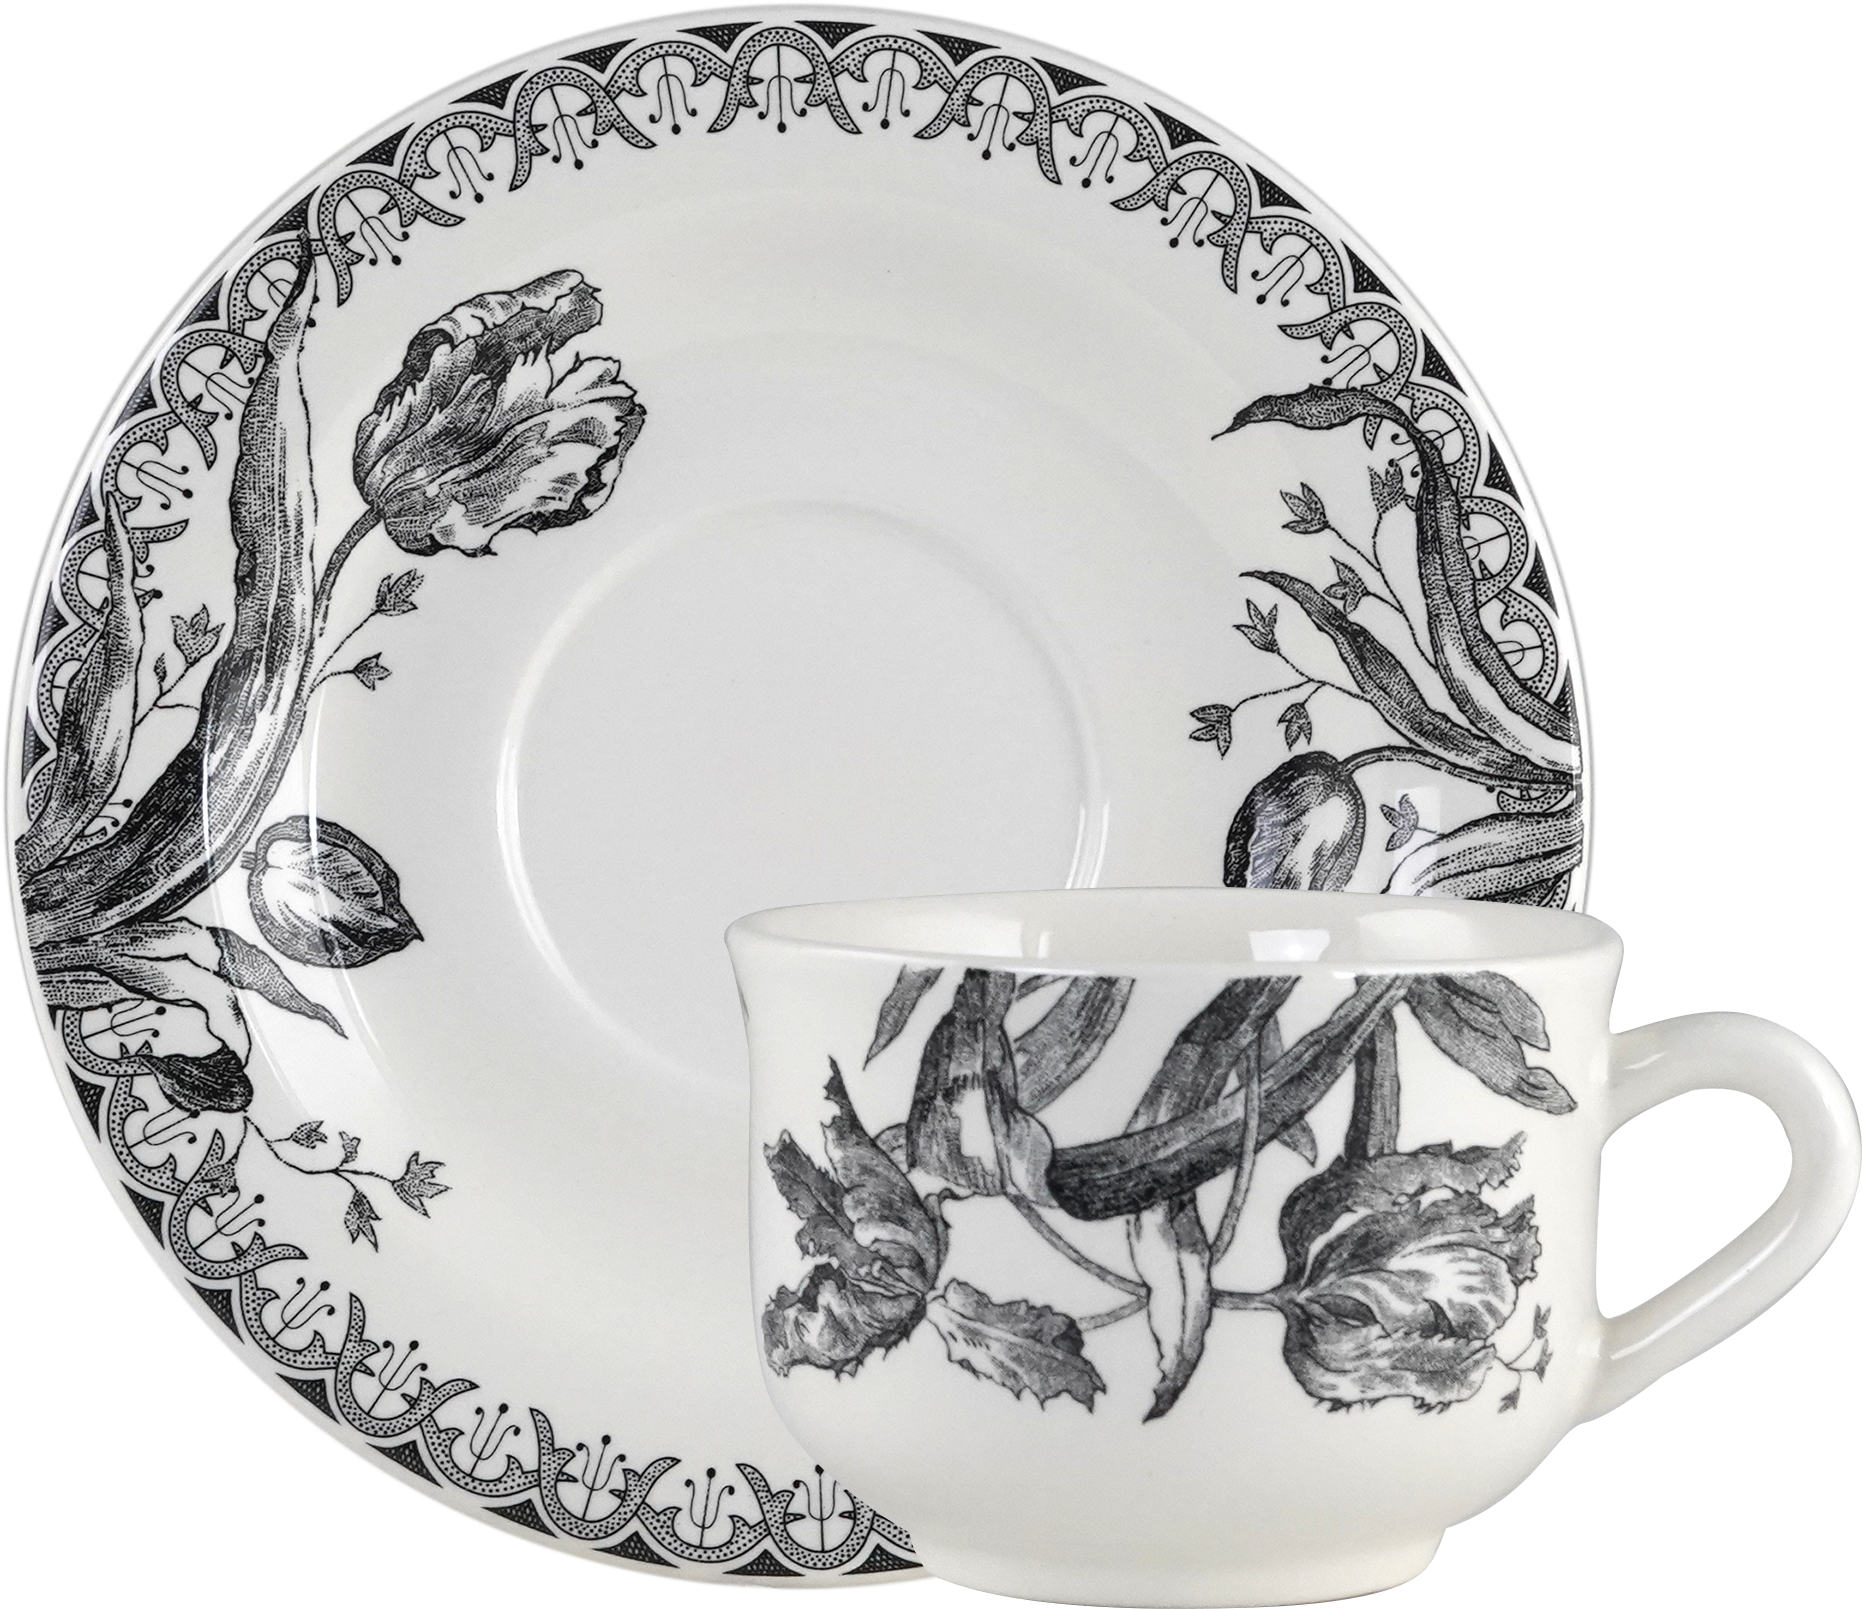 After Dinner  Cup & Saucer, Tulipes Noires